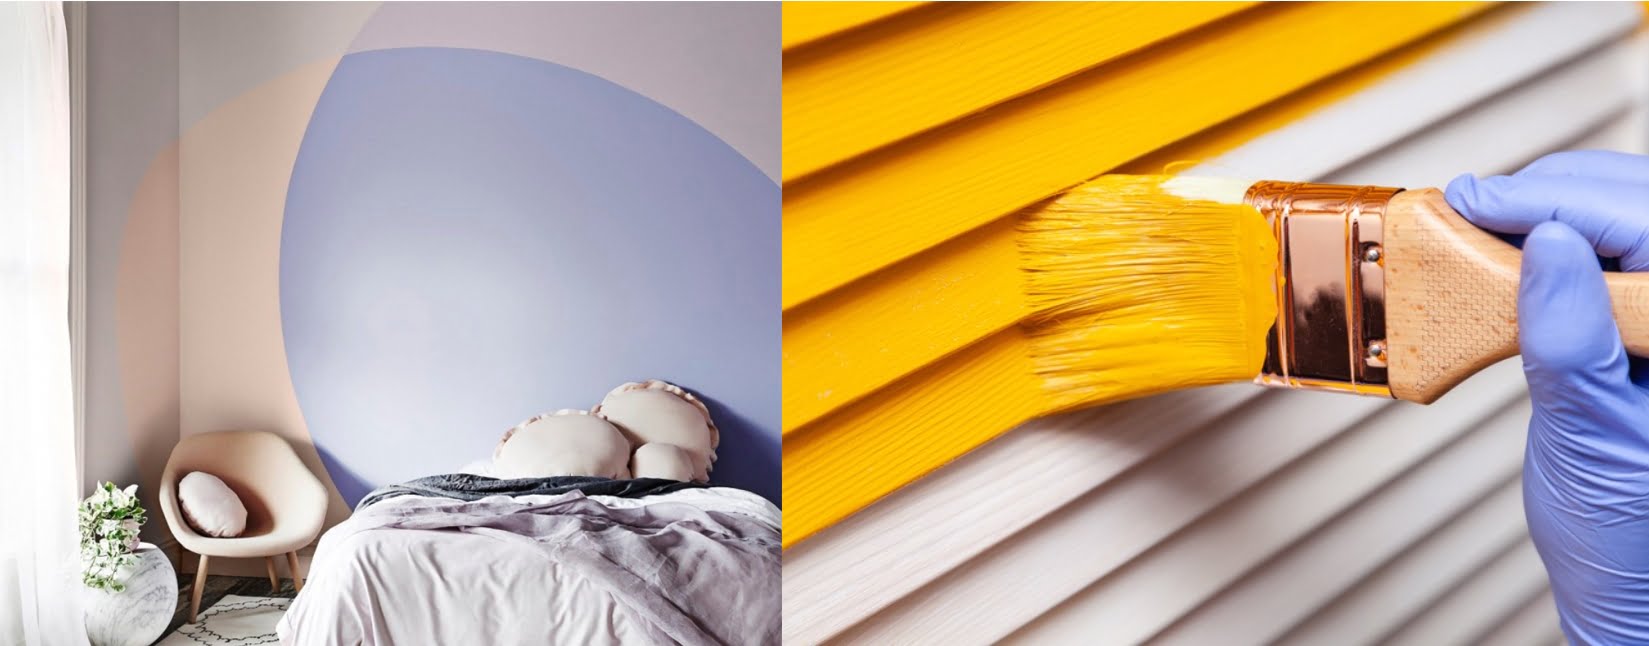 Professional Painting and Decorating Services in Galway